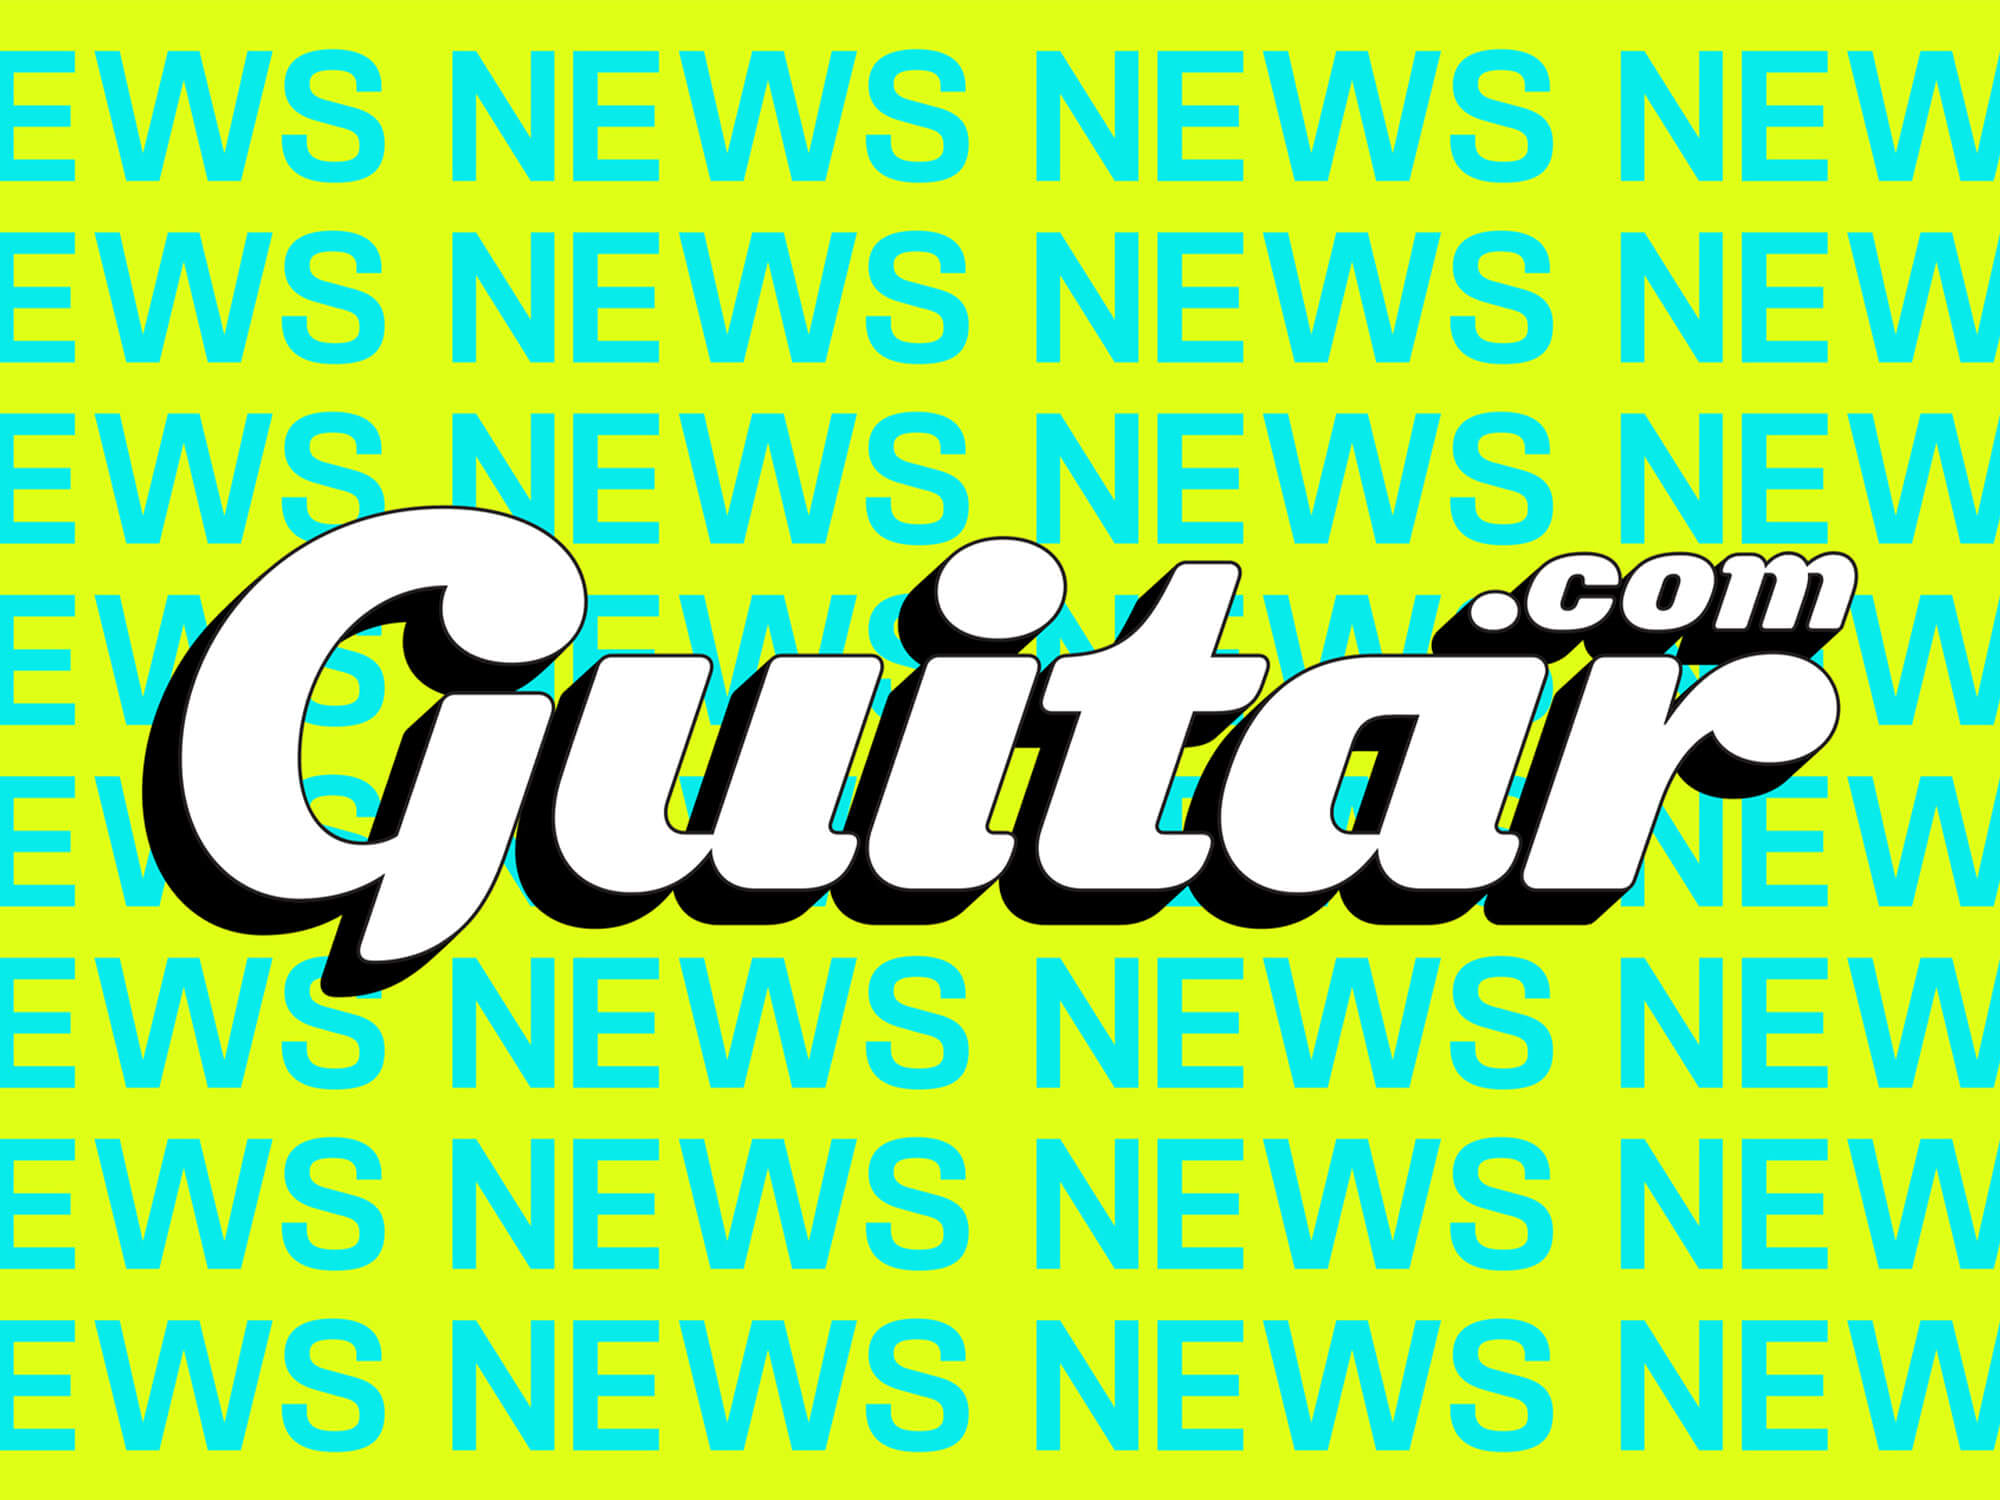 Guitar.com logo on a green background with the word "news" written repeatedly